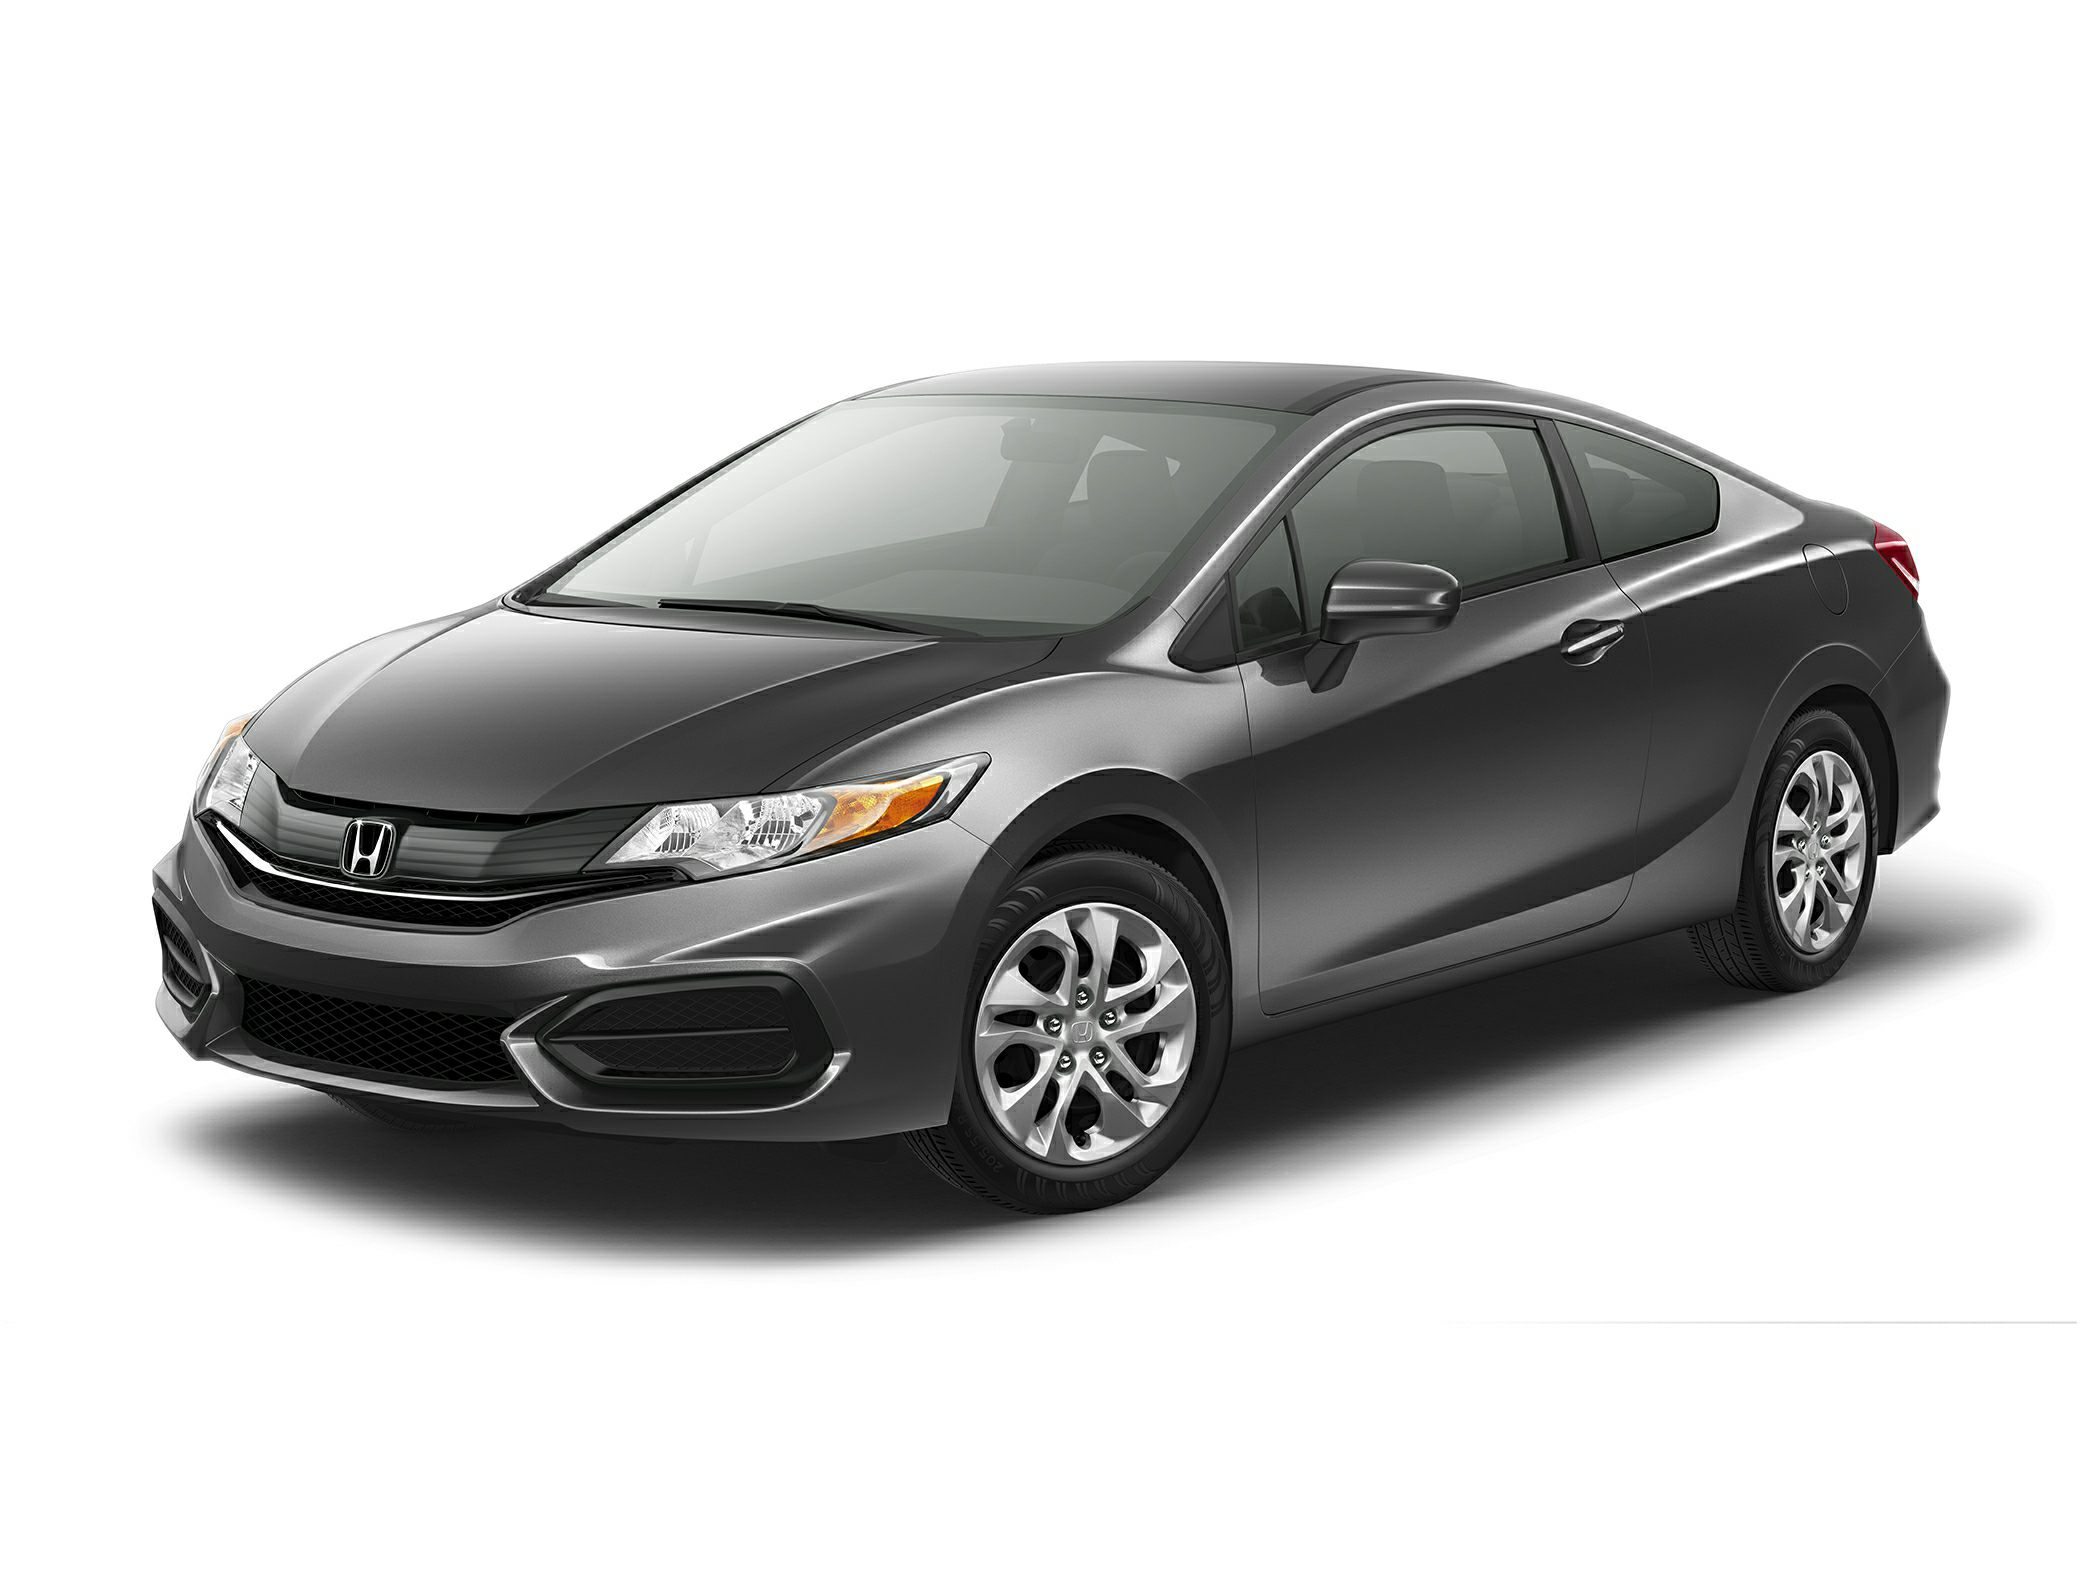 Honda civic special offers #7